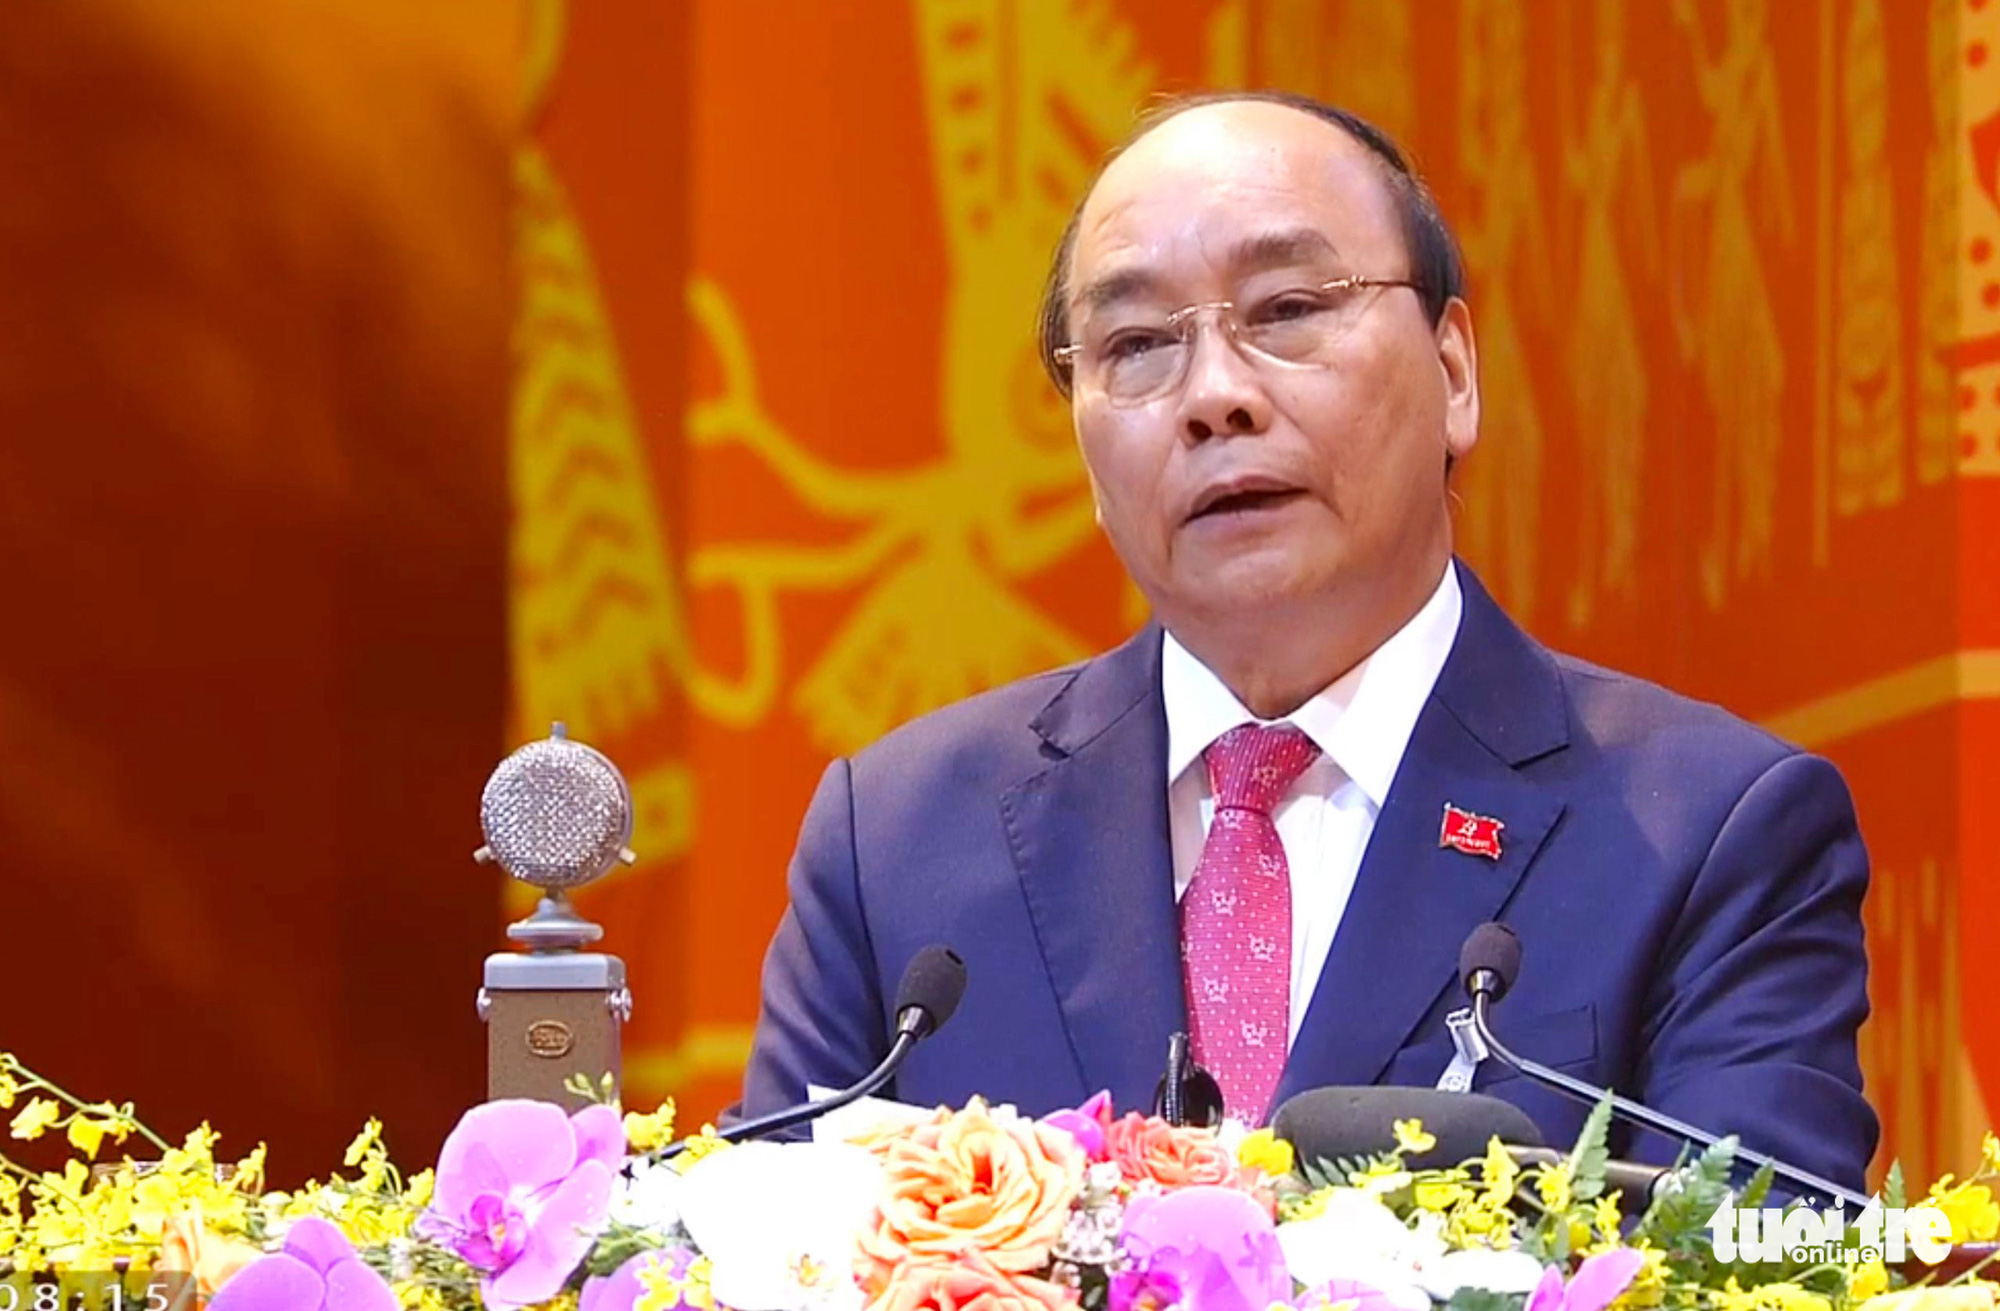 Prime Minister Nguyen Xuan Phuc delivers the opening speech at the 13th National Party Congress in Hanoi, January 26, 2021. Photo: N.K. / Tuoi Tre